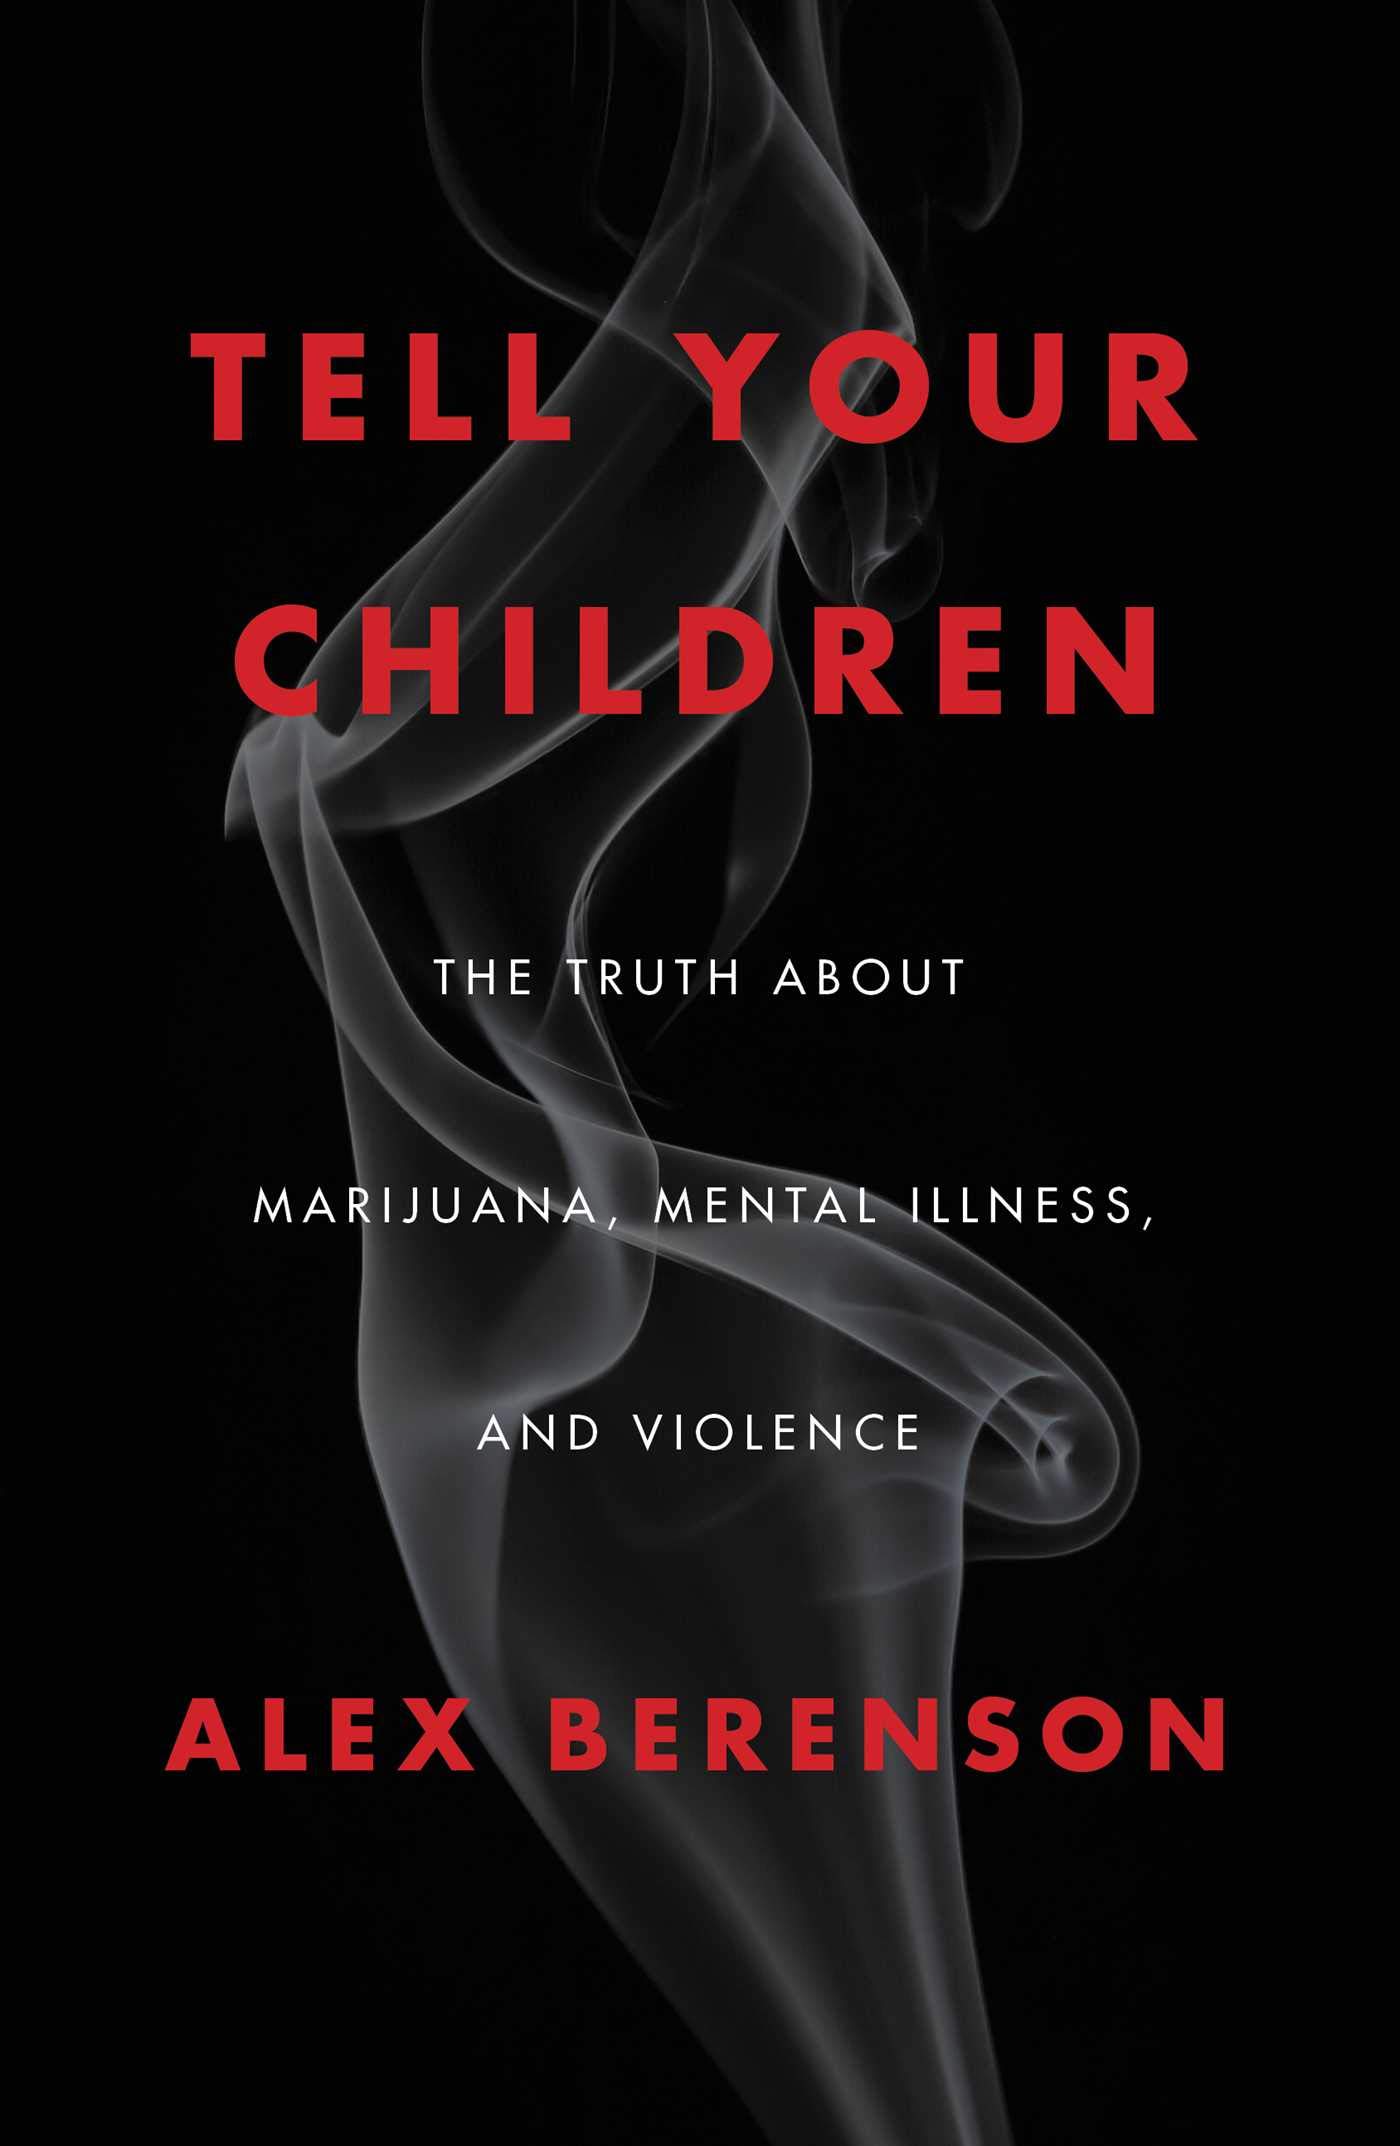 Tell Your Children: The Truth About Marijuana, Mental Illness and Violence